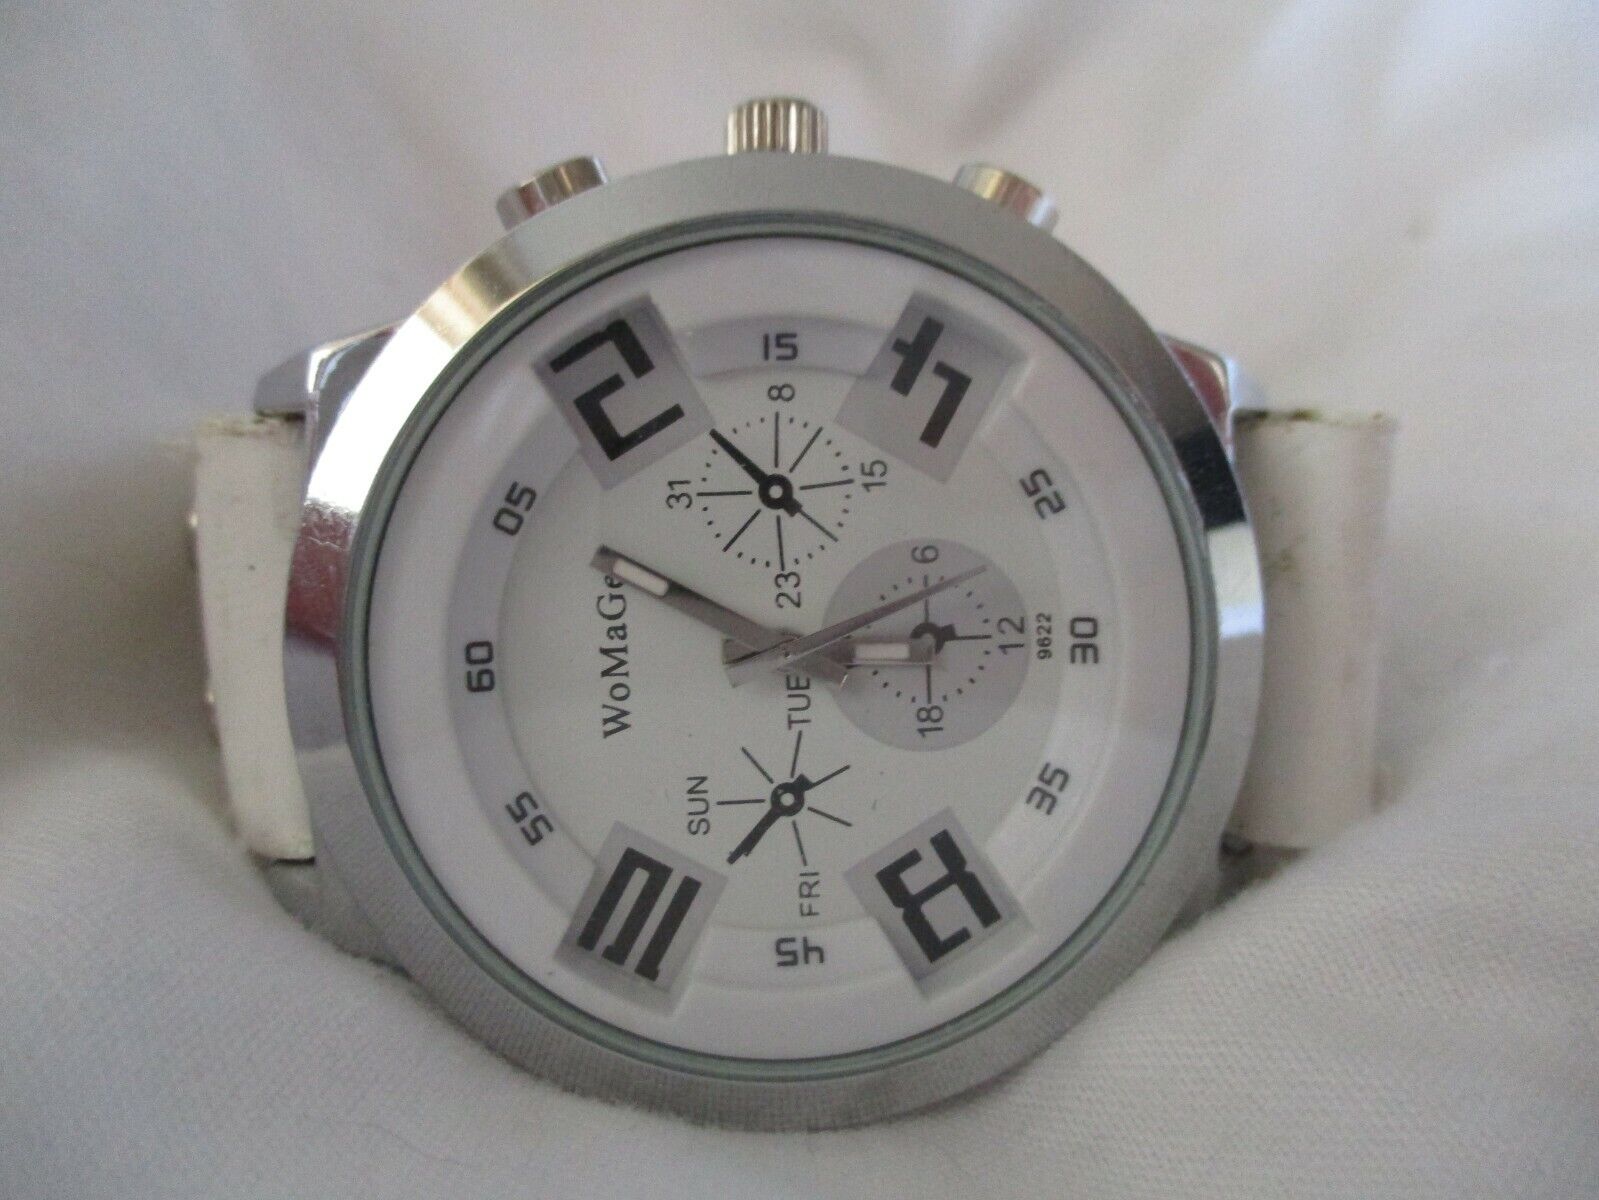 WoMaGe White & Silver Toned Wristwatch w/ Adjustable Buckle Band